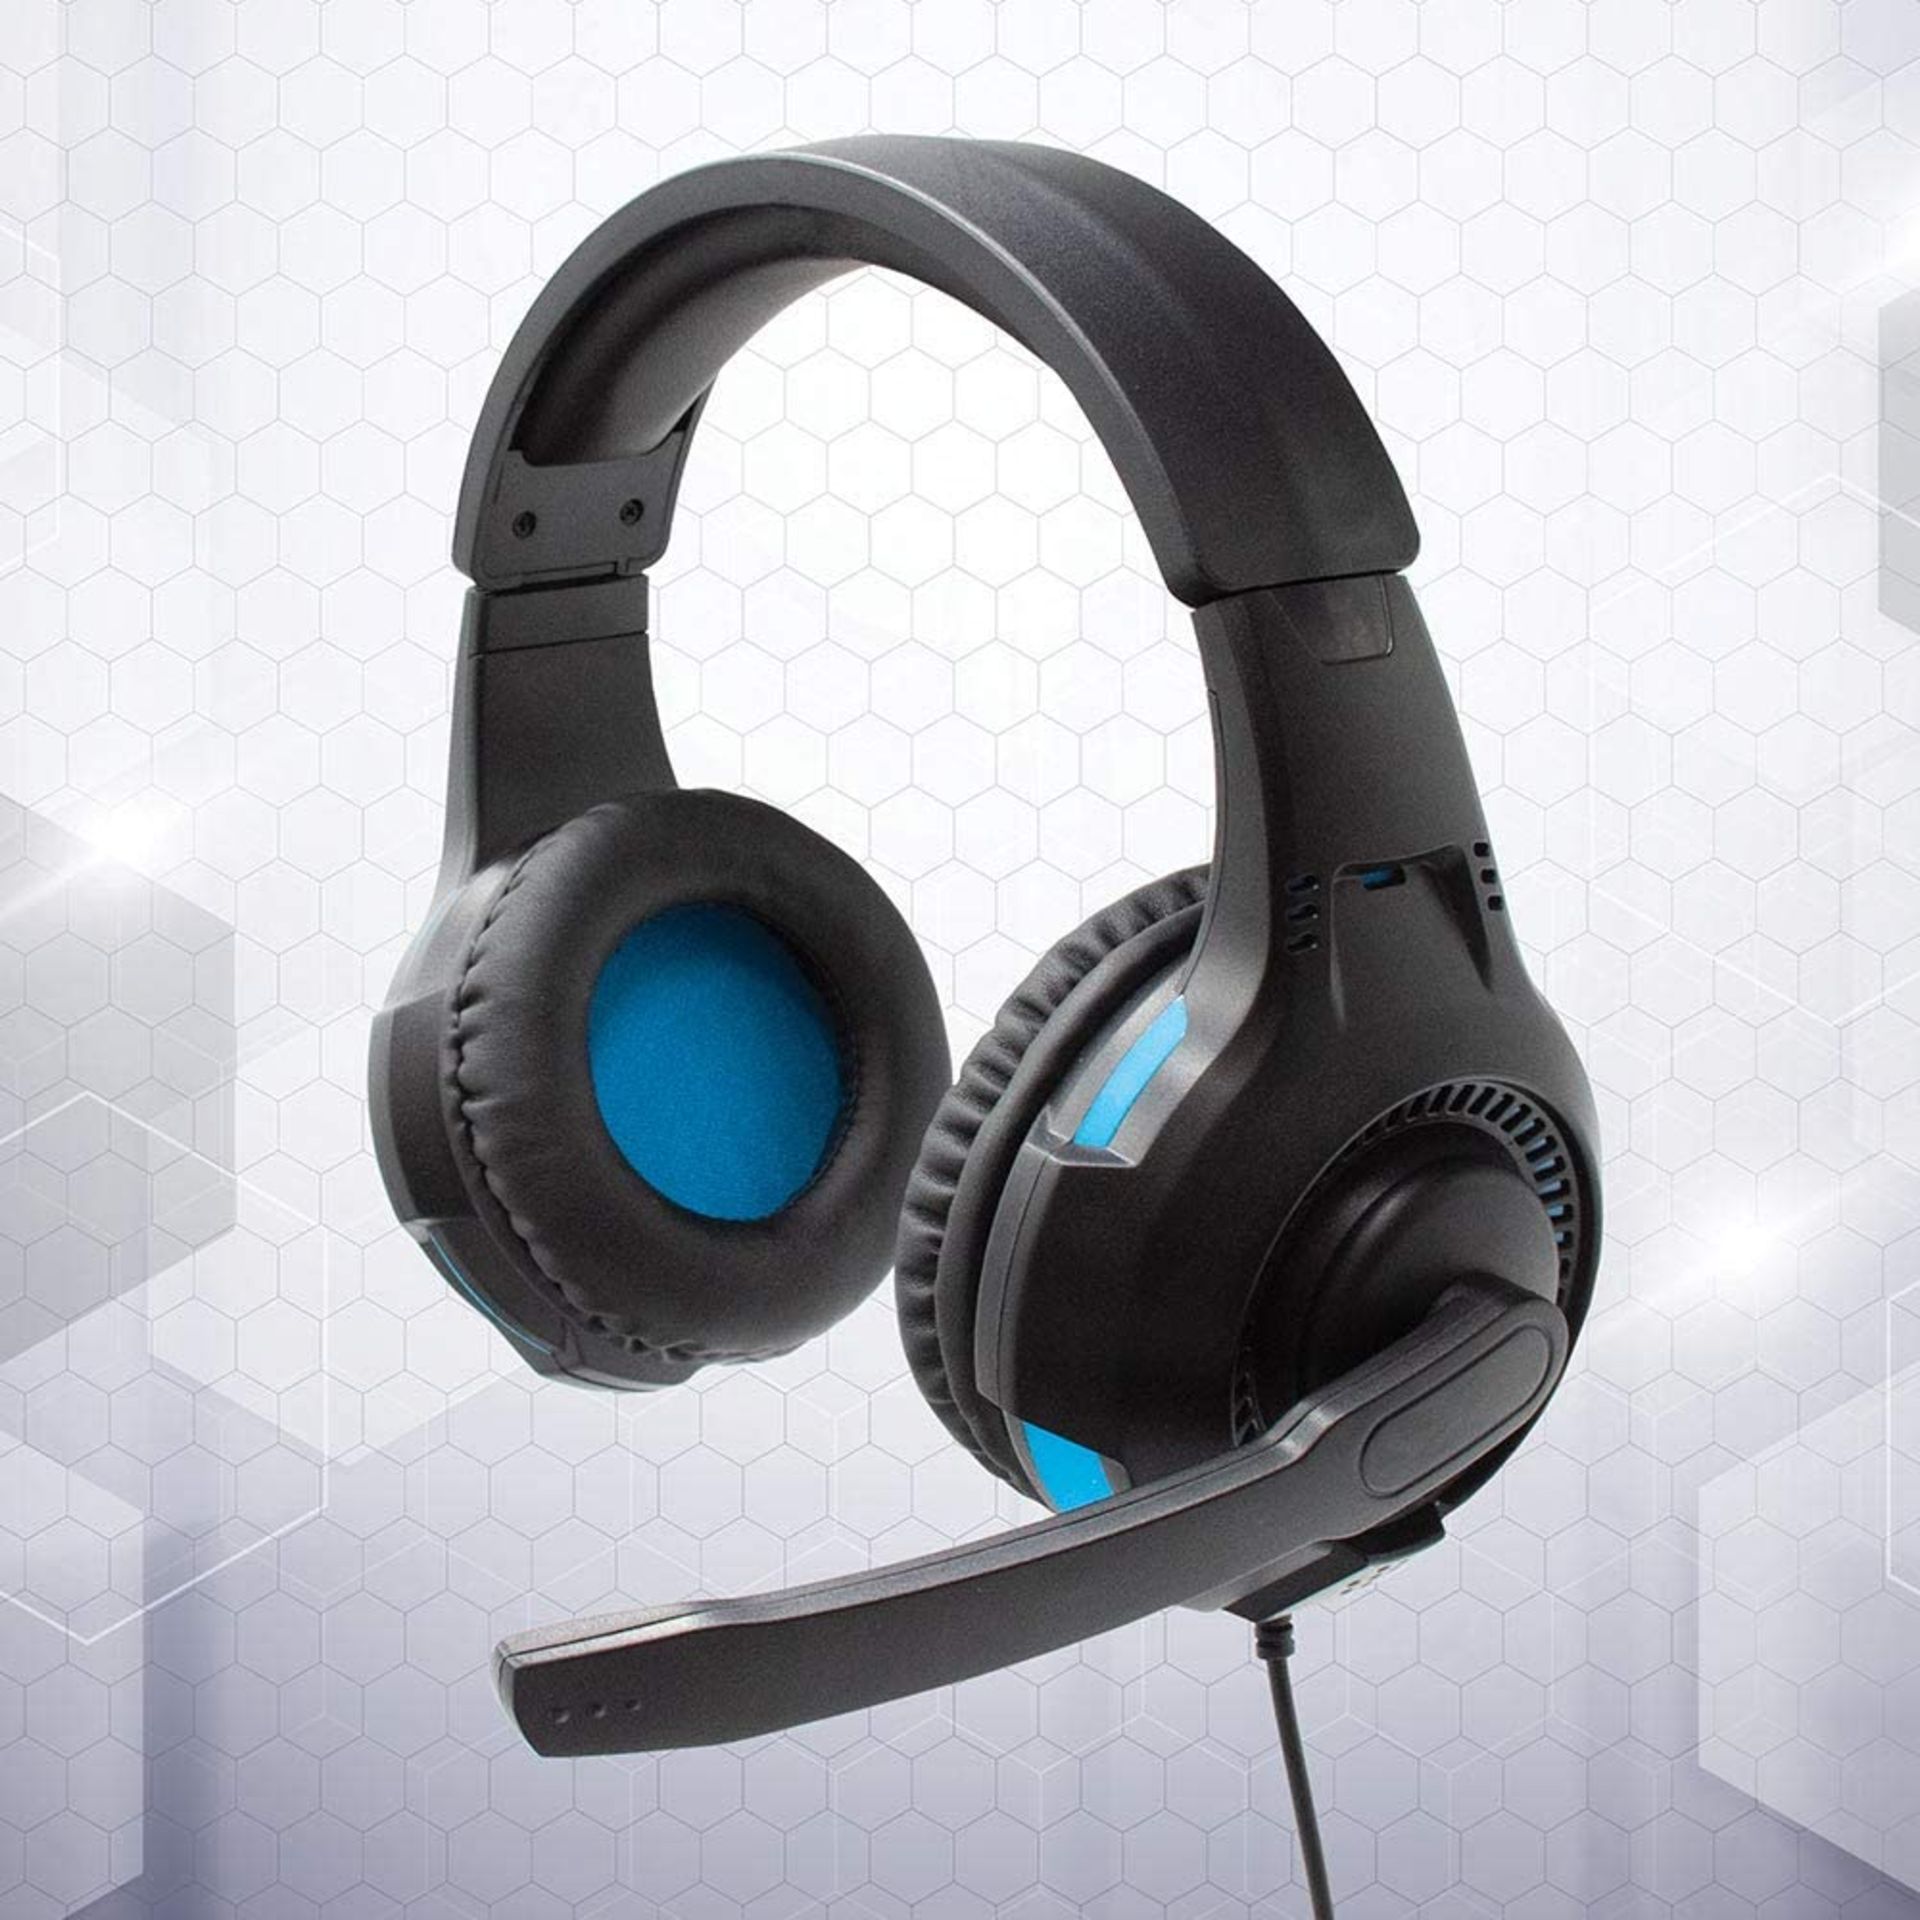 3 x RED5 Gaming Comet Headphones. - BW. It’s a soft cushioned blue gaming headset! Features a fold